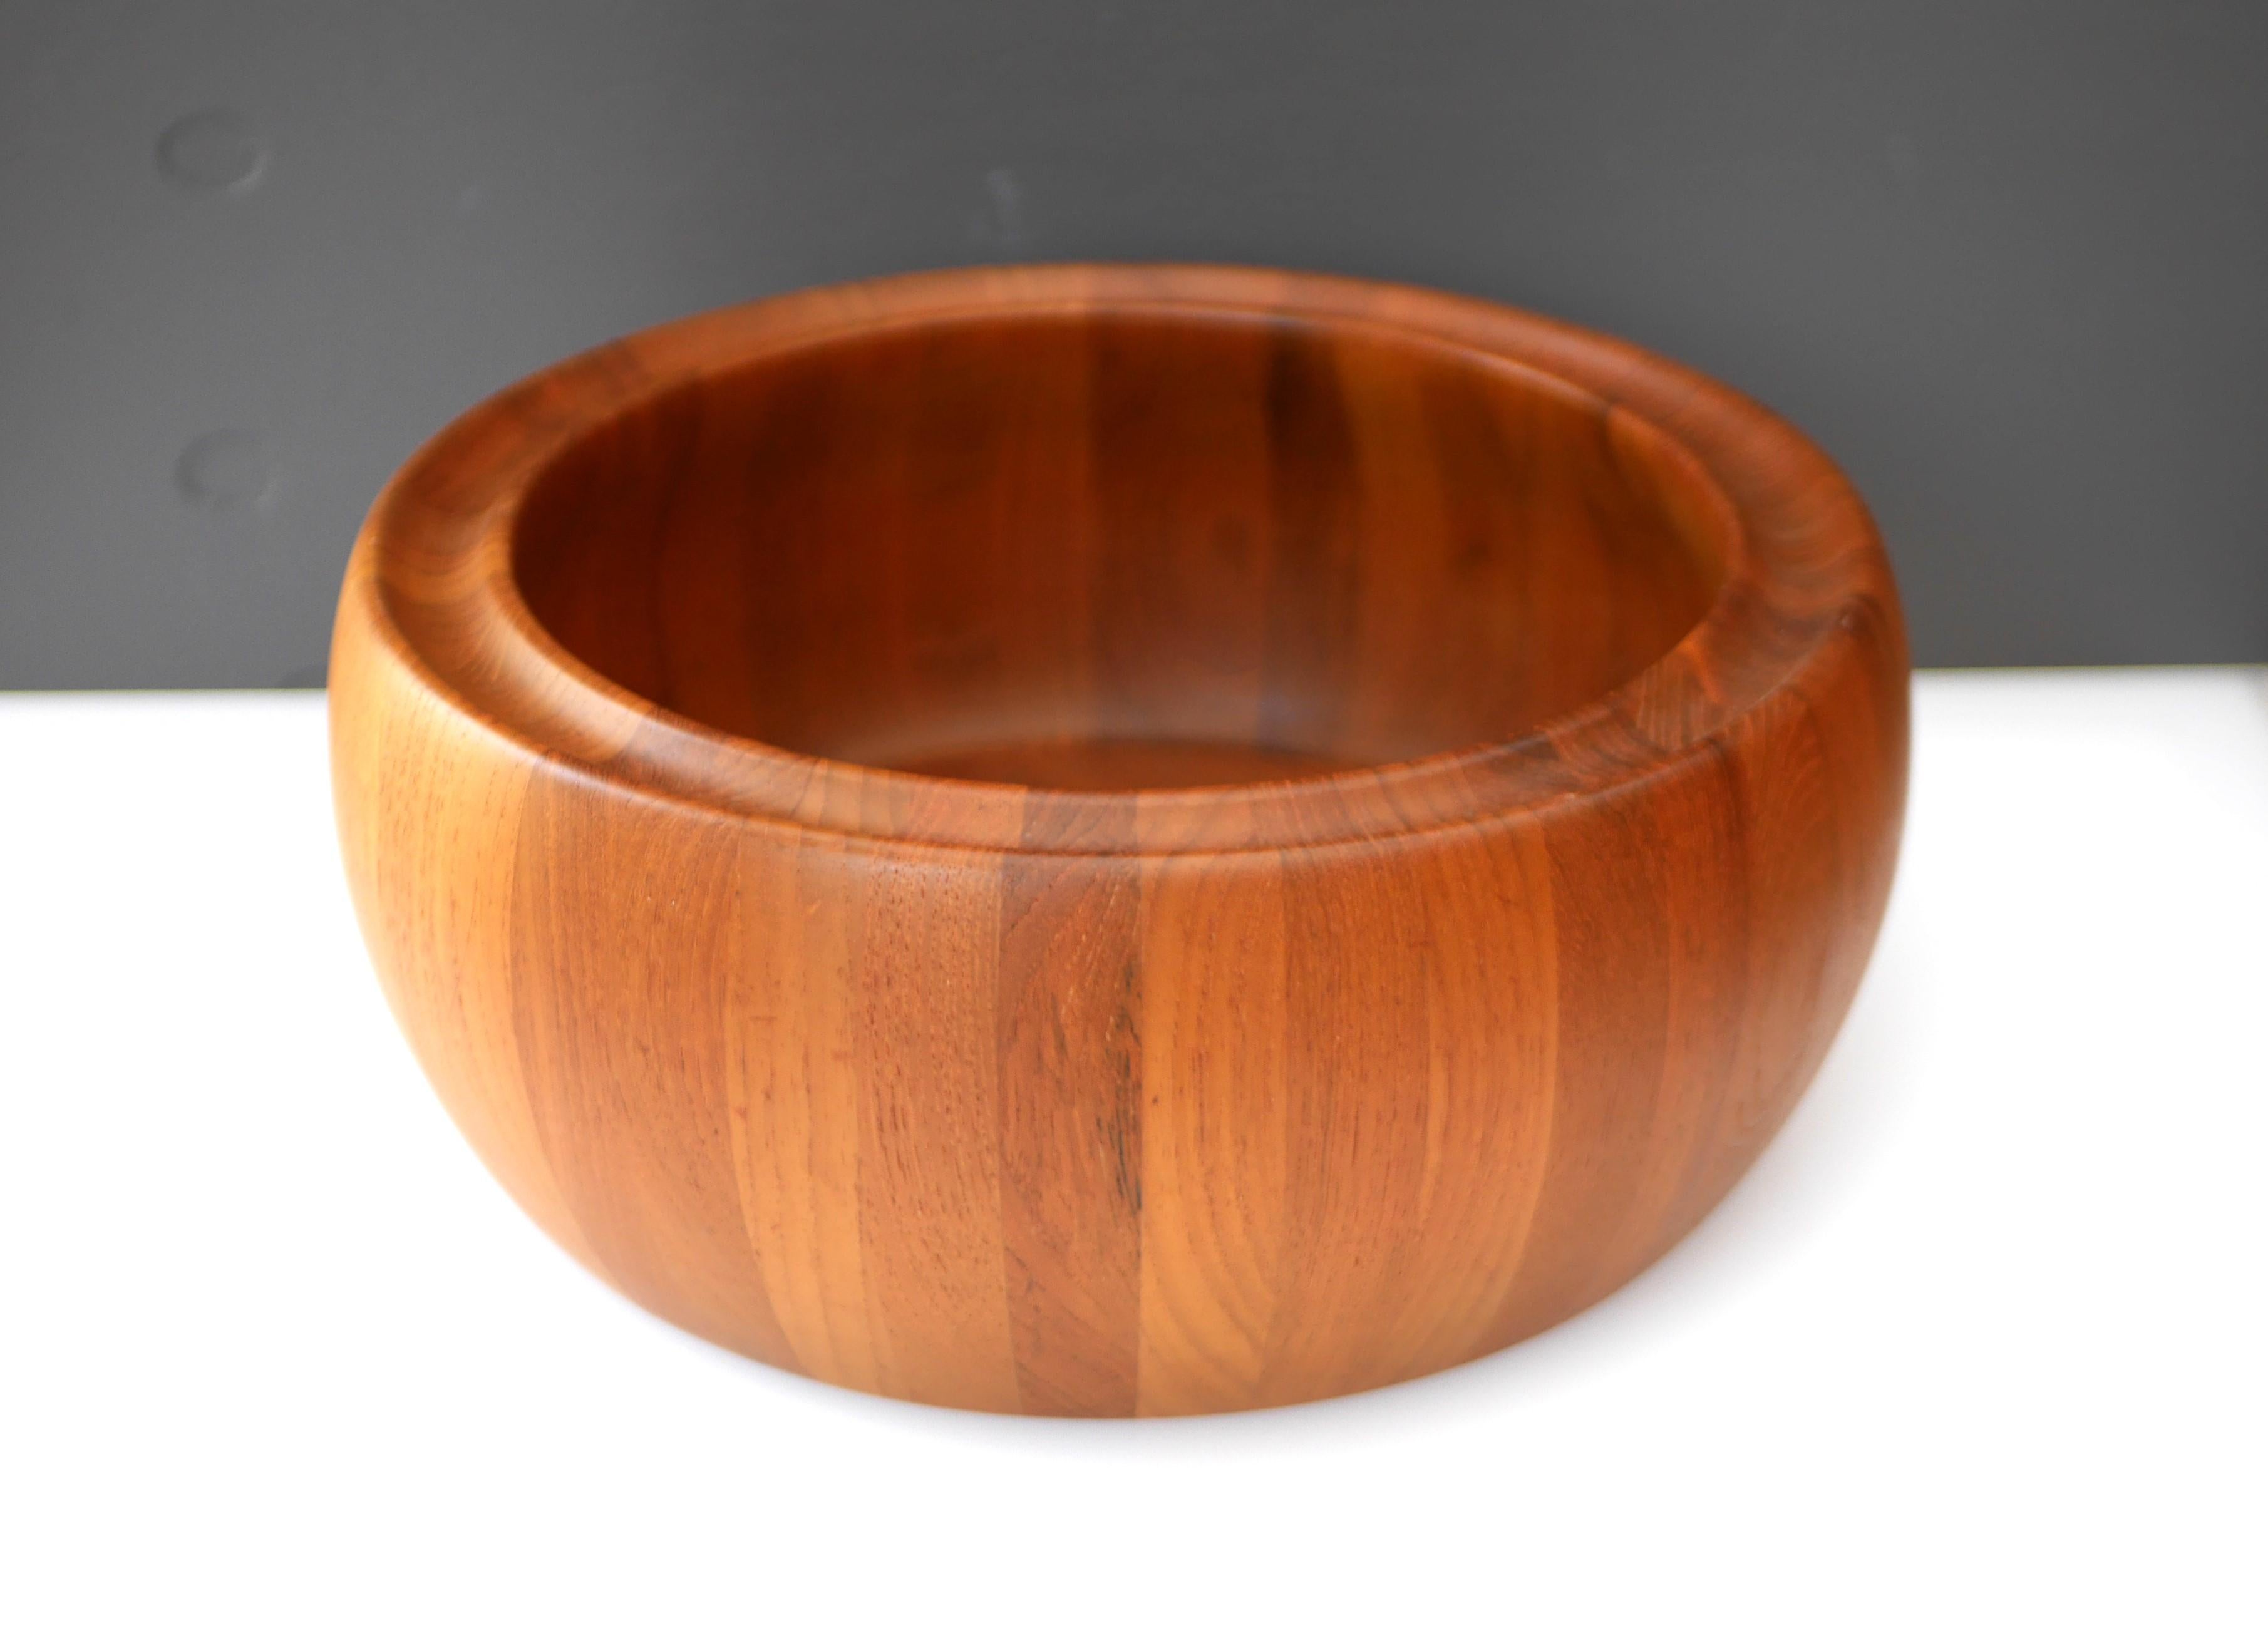 A rather large Mid-century modern teak bowl from Digsmed, Denmark, which can be used as a lovely fruit and/or salad bowl, or a Vide-Poche. The quality of this bowl is of a very high standard and the shape is really special. It has a simple shape yet